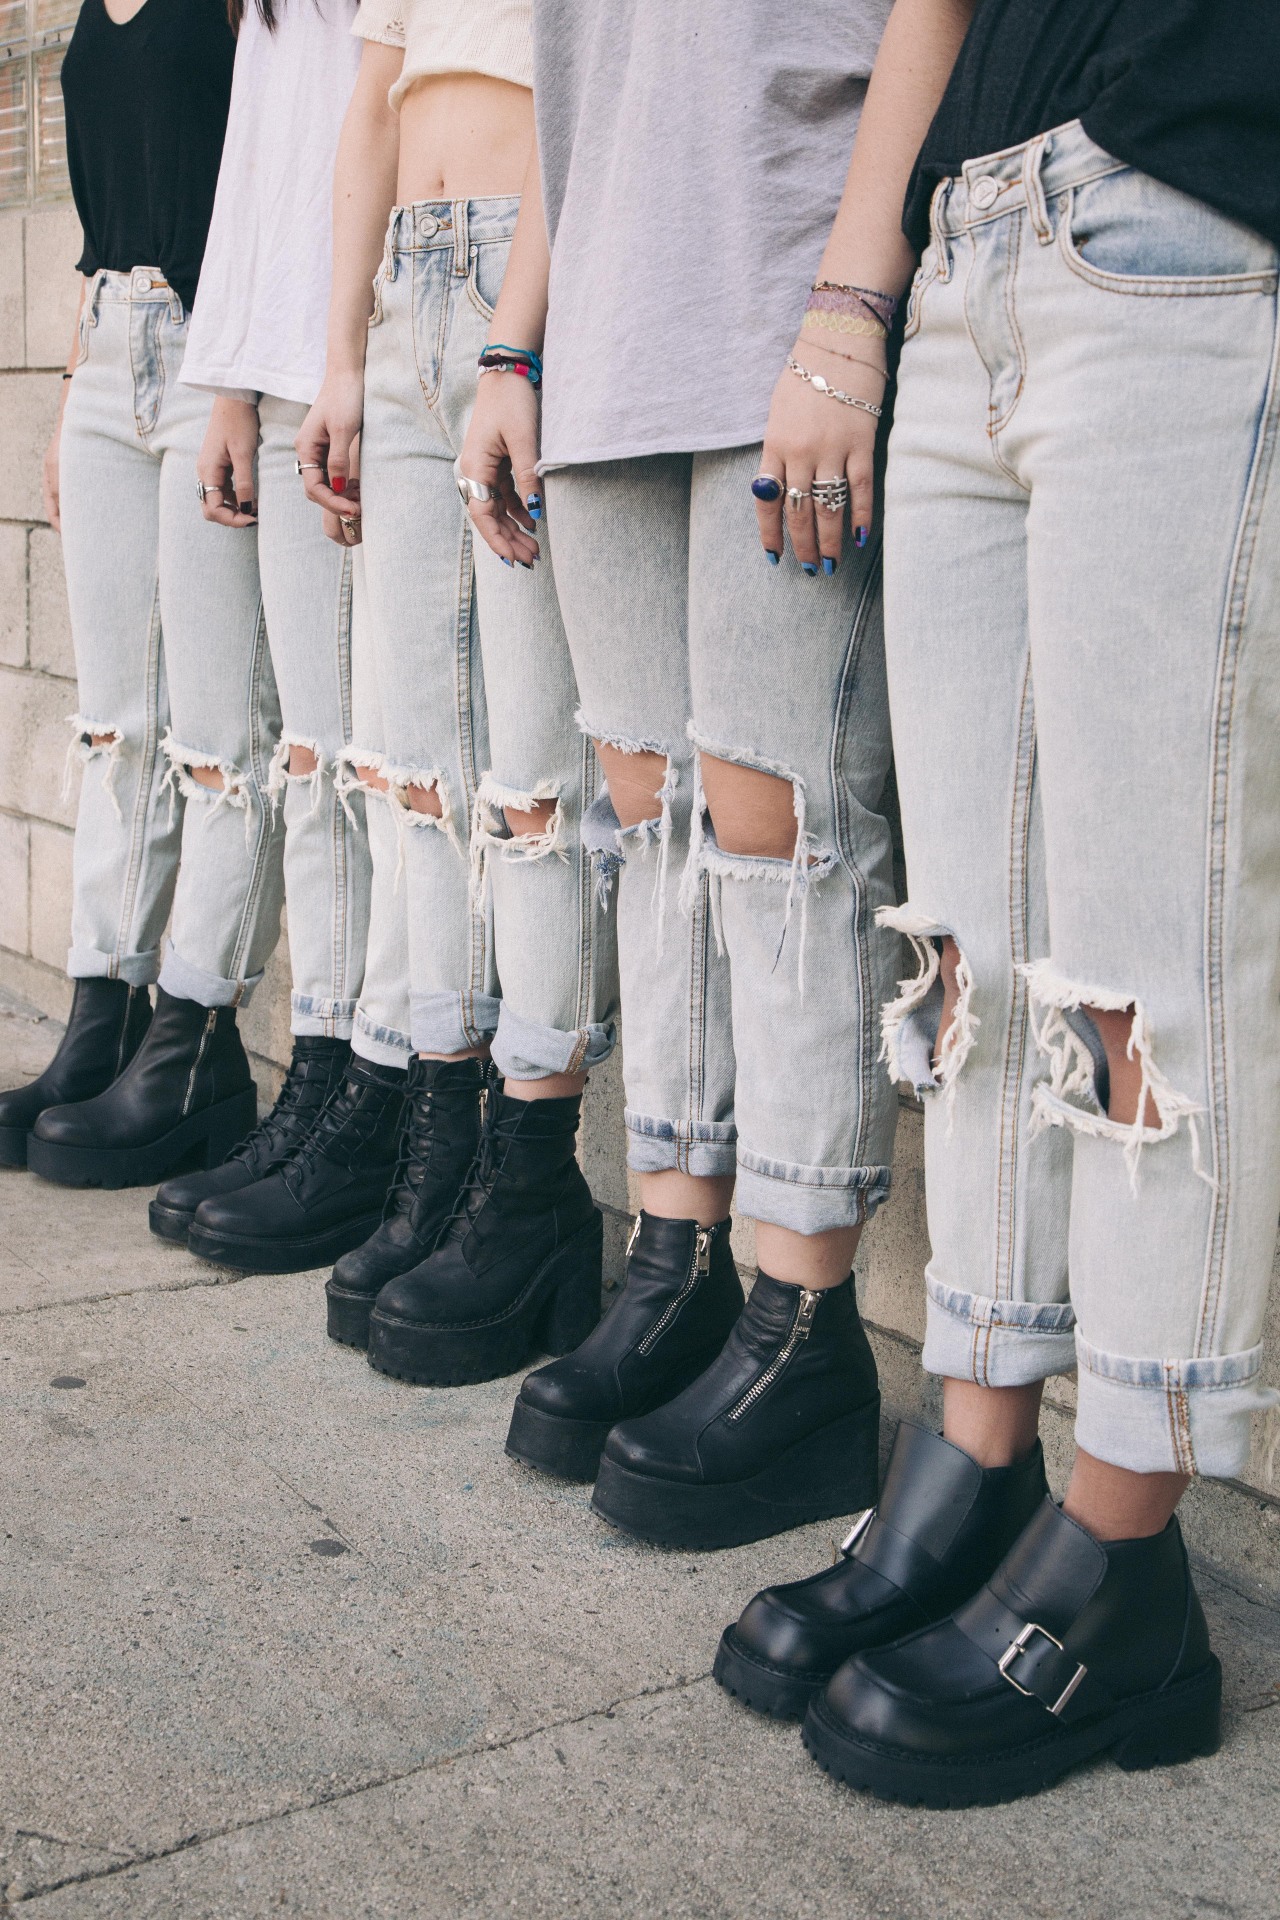 rival boots unif